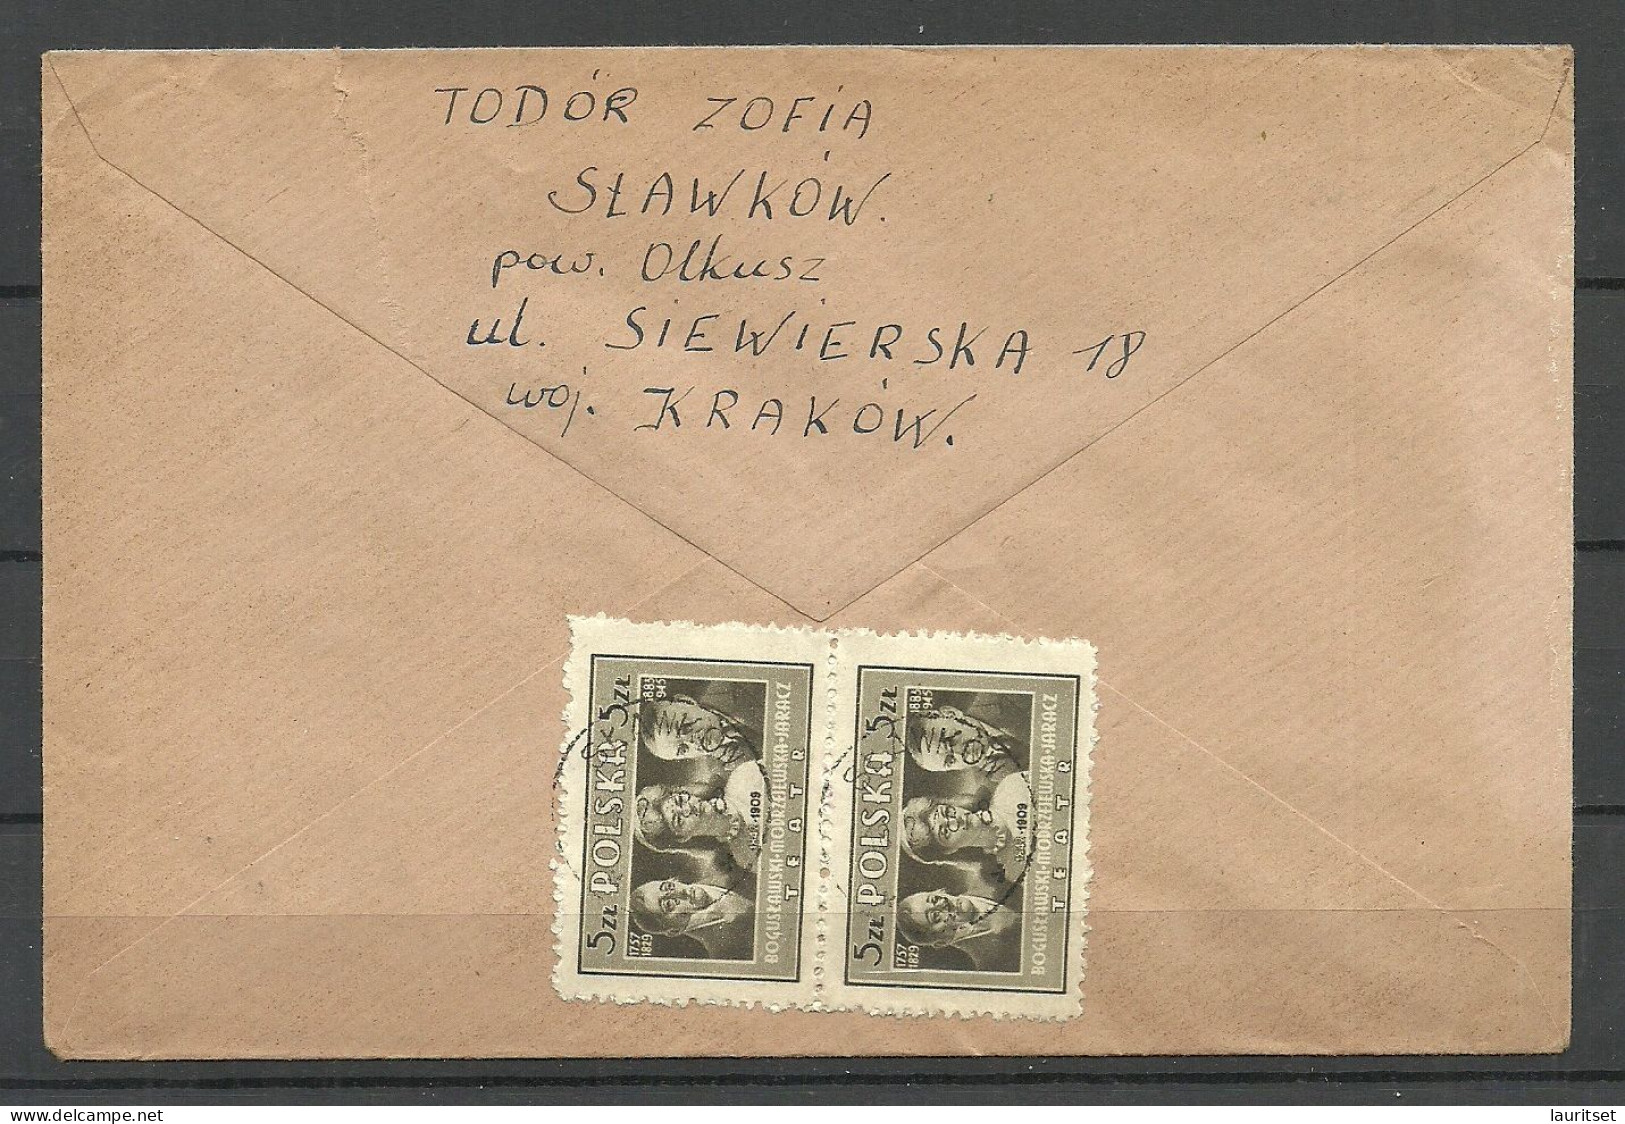 POLEN Poland 1948 Air Mail Cover O SLAWKOW To London Great Britain - Aviones